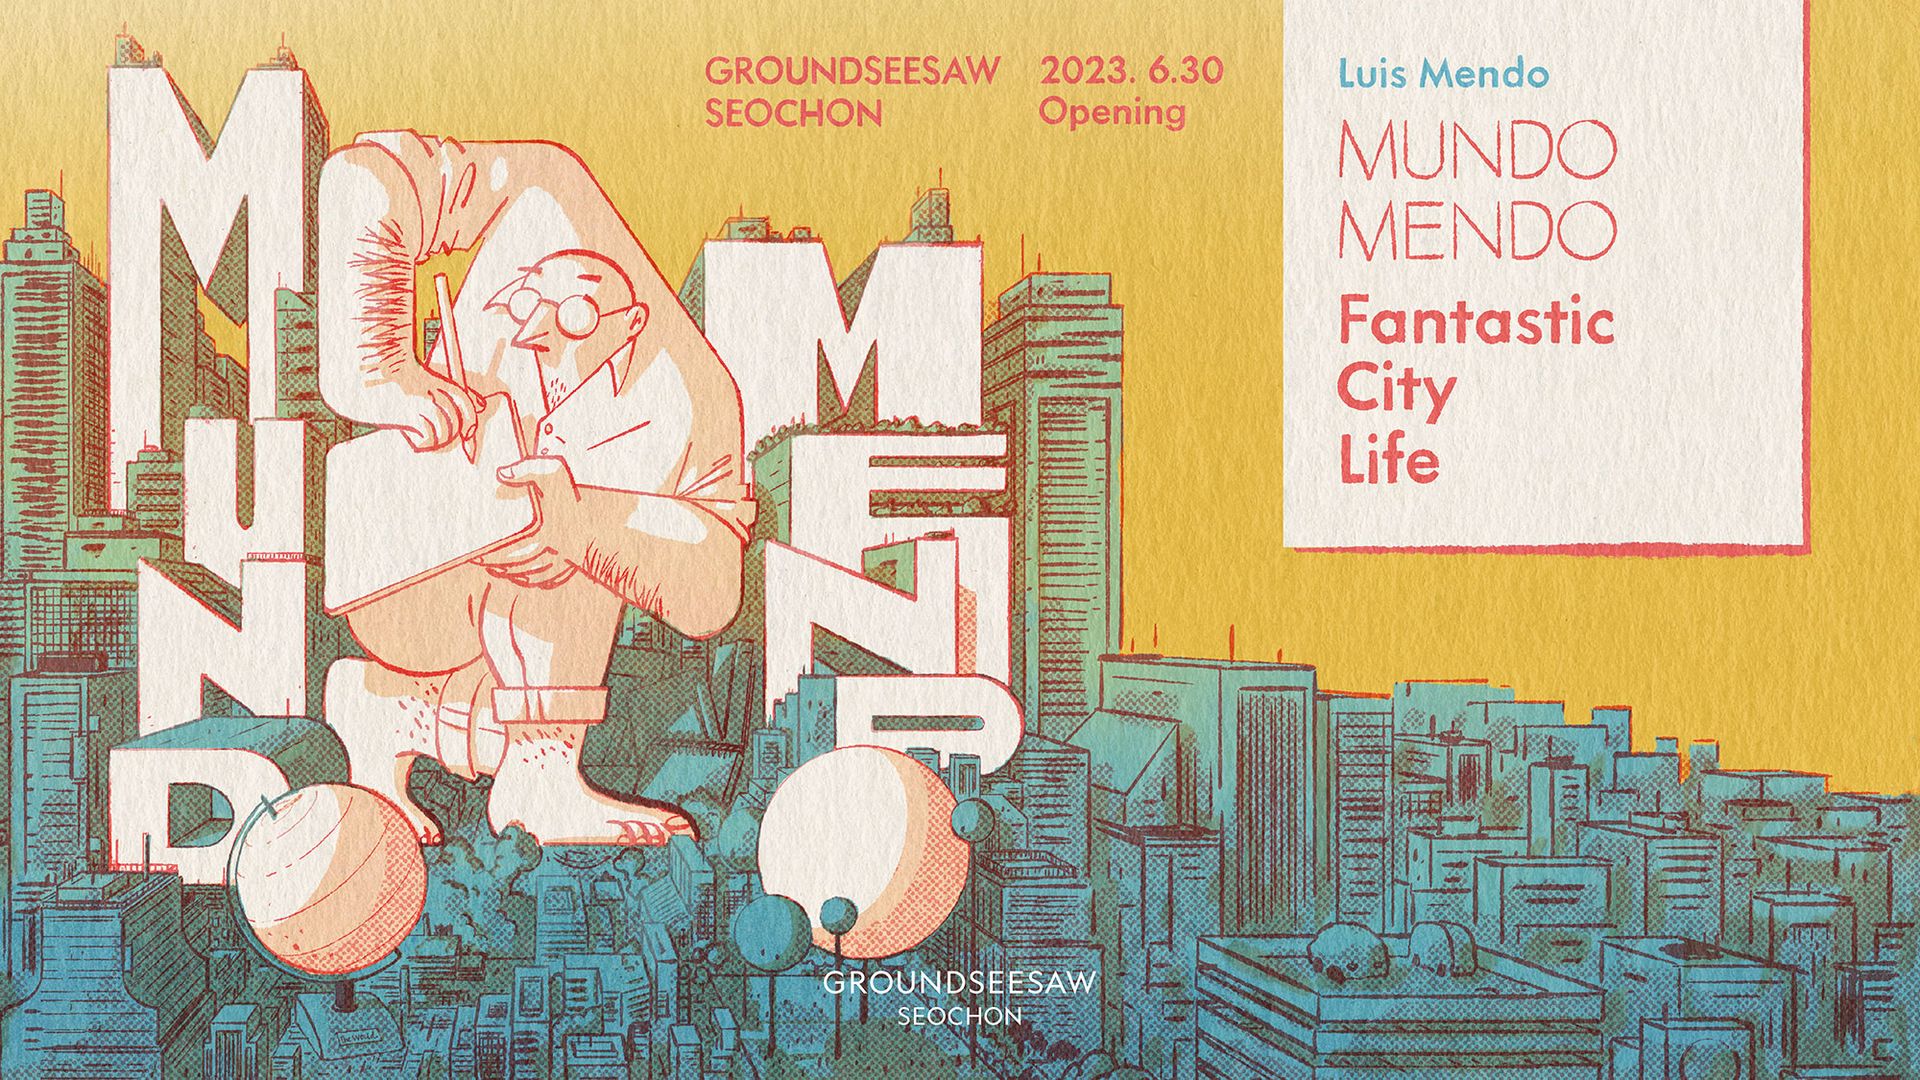 MUNDO MENDO Fantastic City Life  Art show is now open in Seoul, June 30th to Dec 3rd 2023